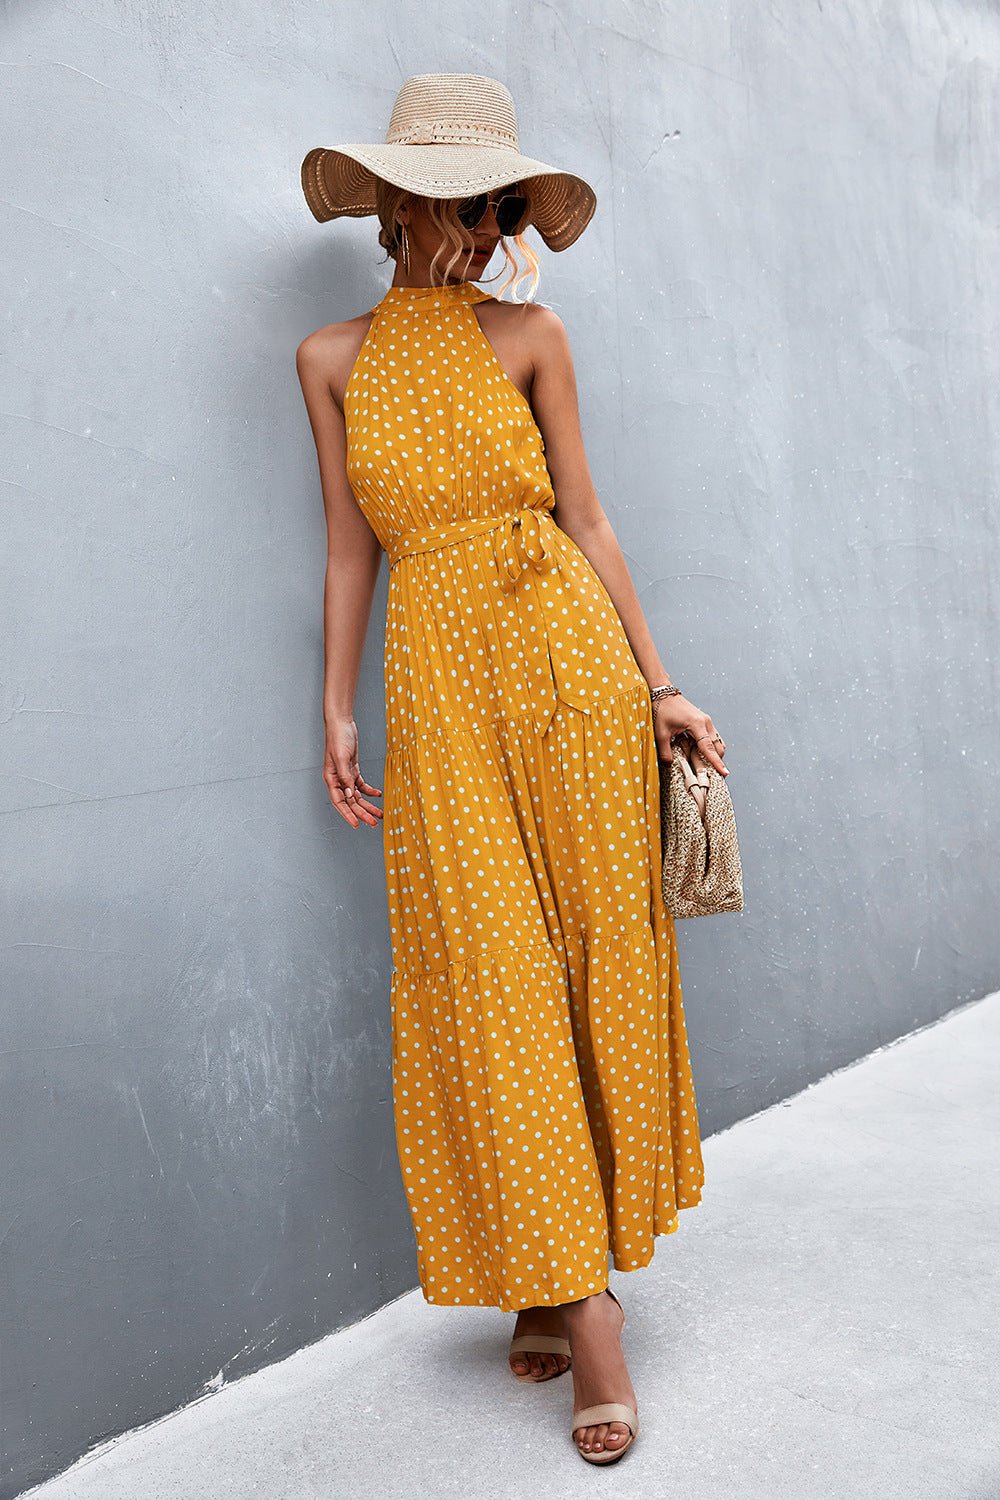 Let Me Remind You Printed Maxi Dress - yellow polka dot maxi dress with halter neck and tie waist. #Firefly Lane Boutique1